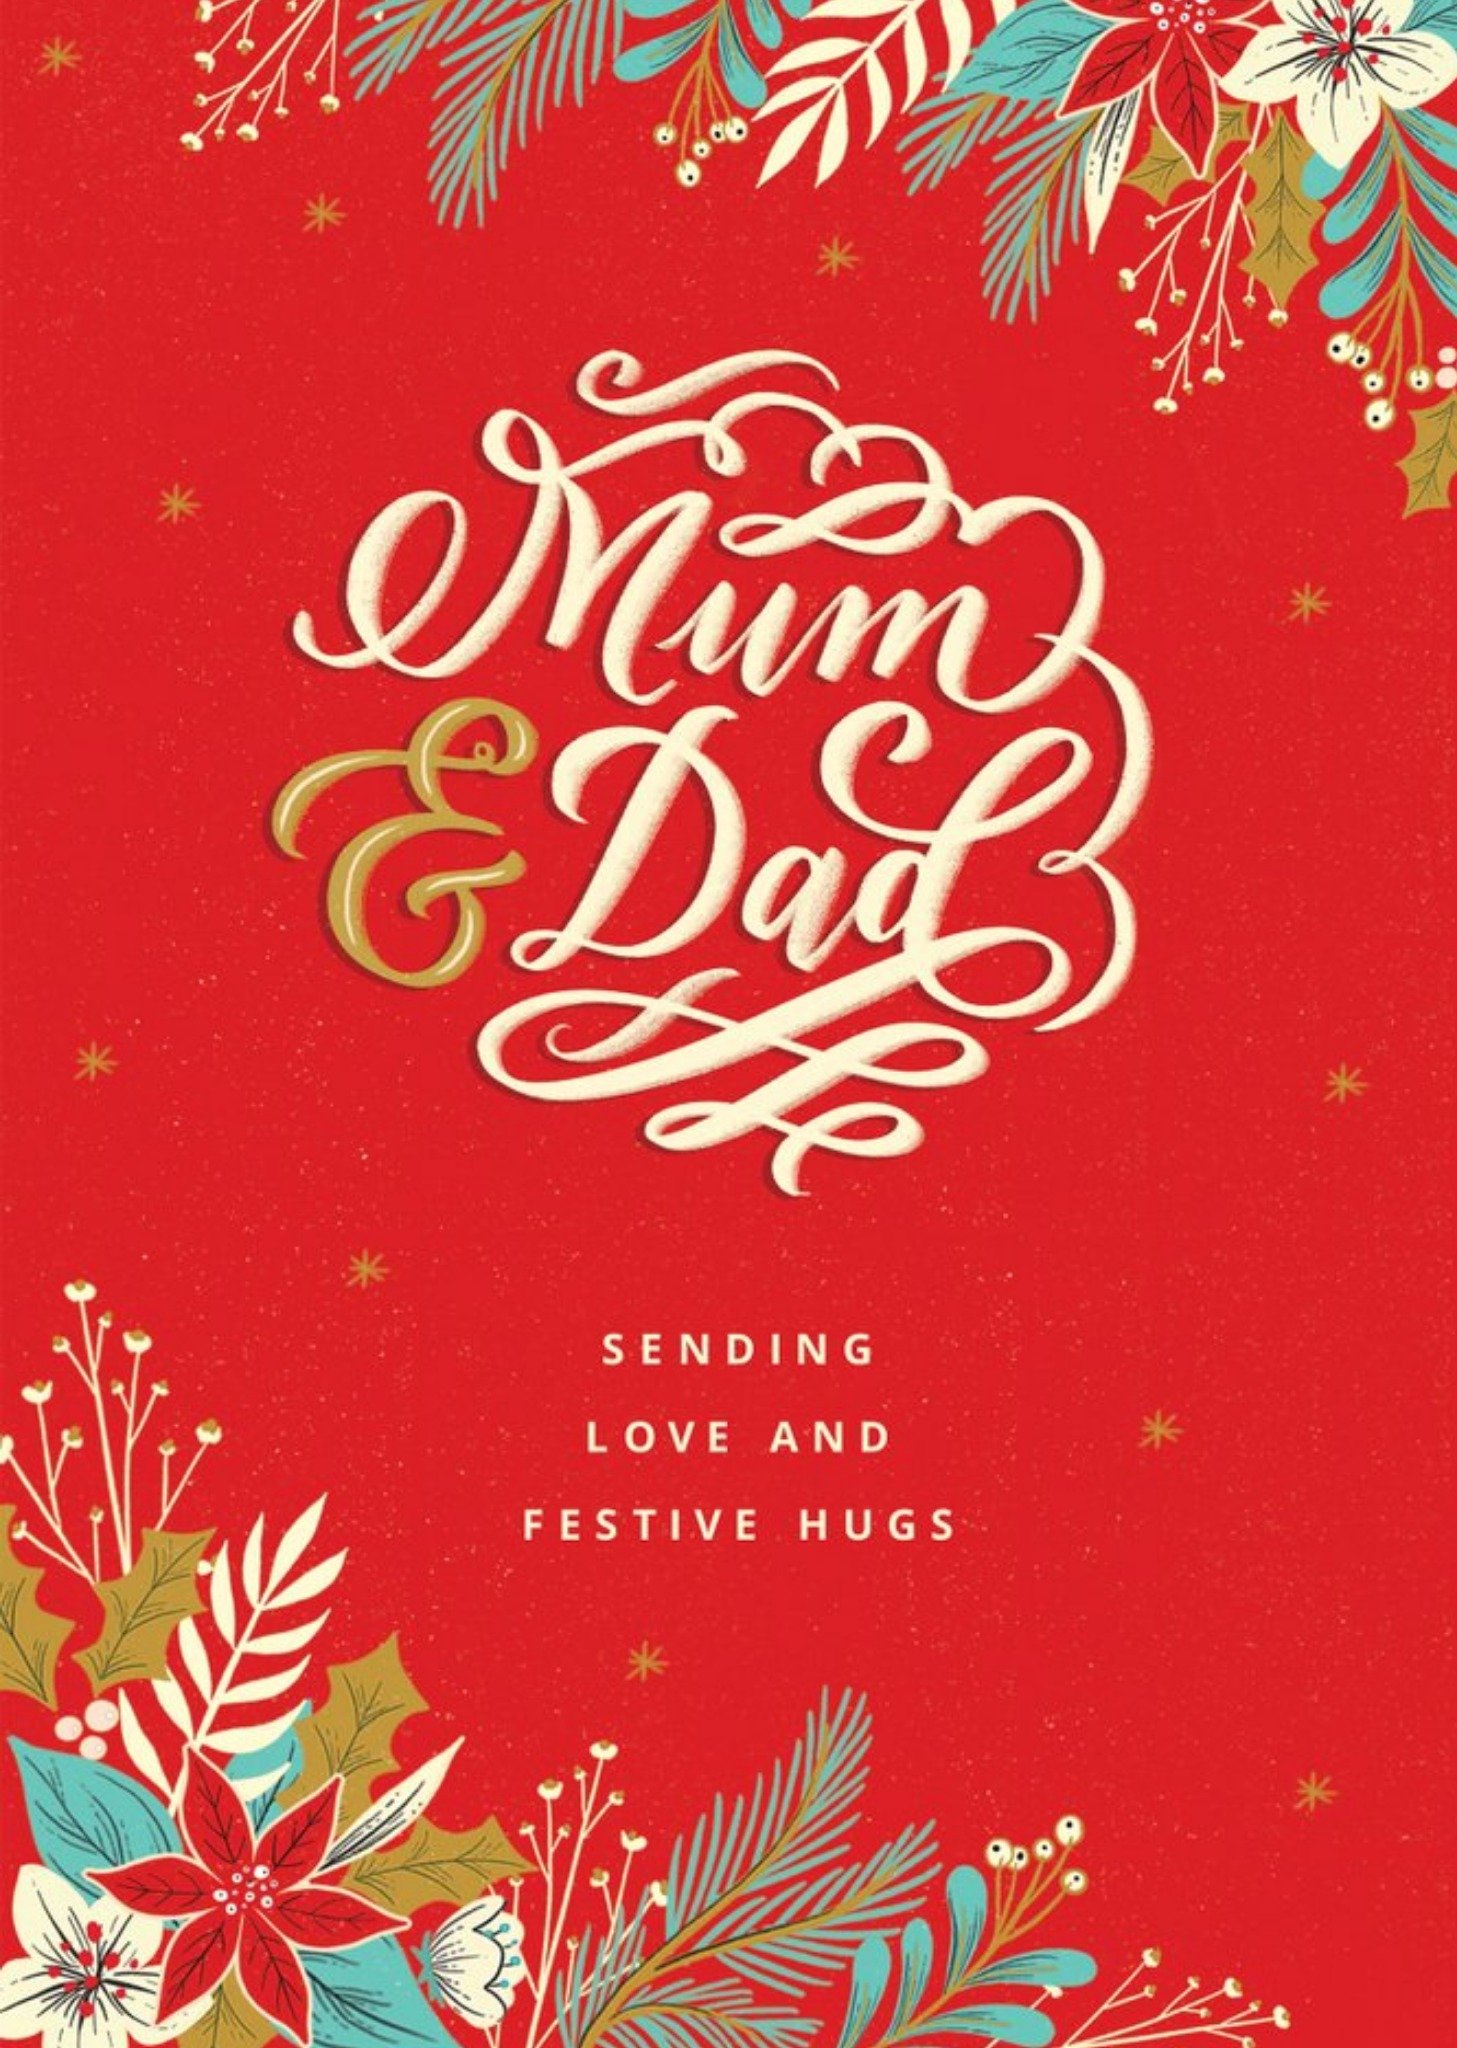 Moonpig Floral Mum And Dad Sending You Love And Festive Hugs Christmas Card, Large